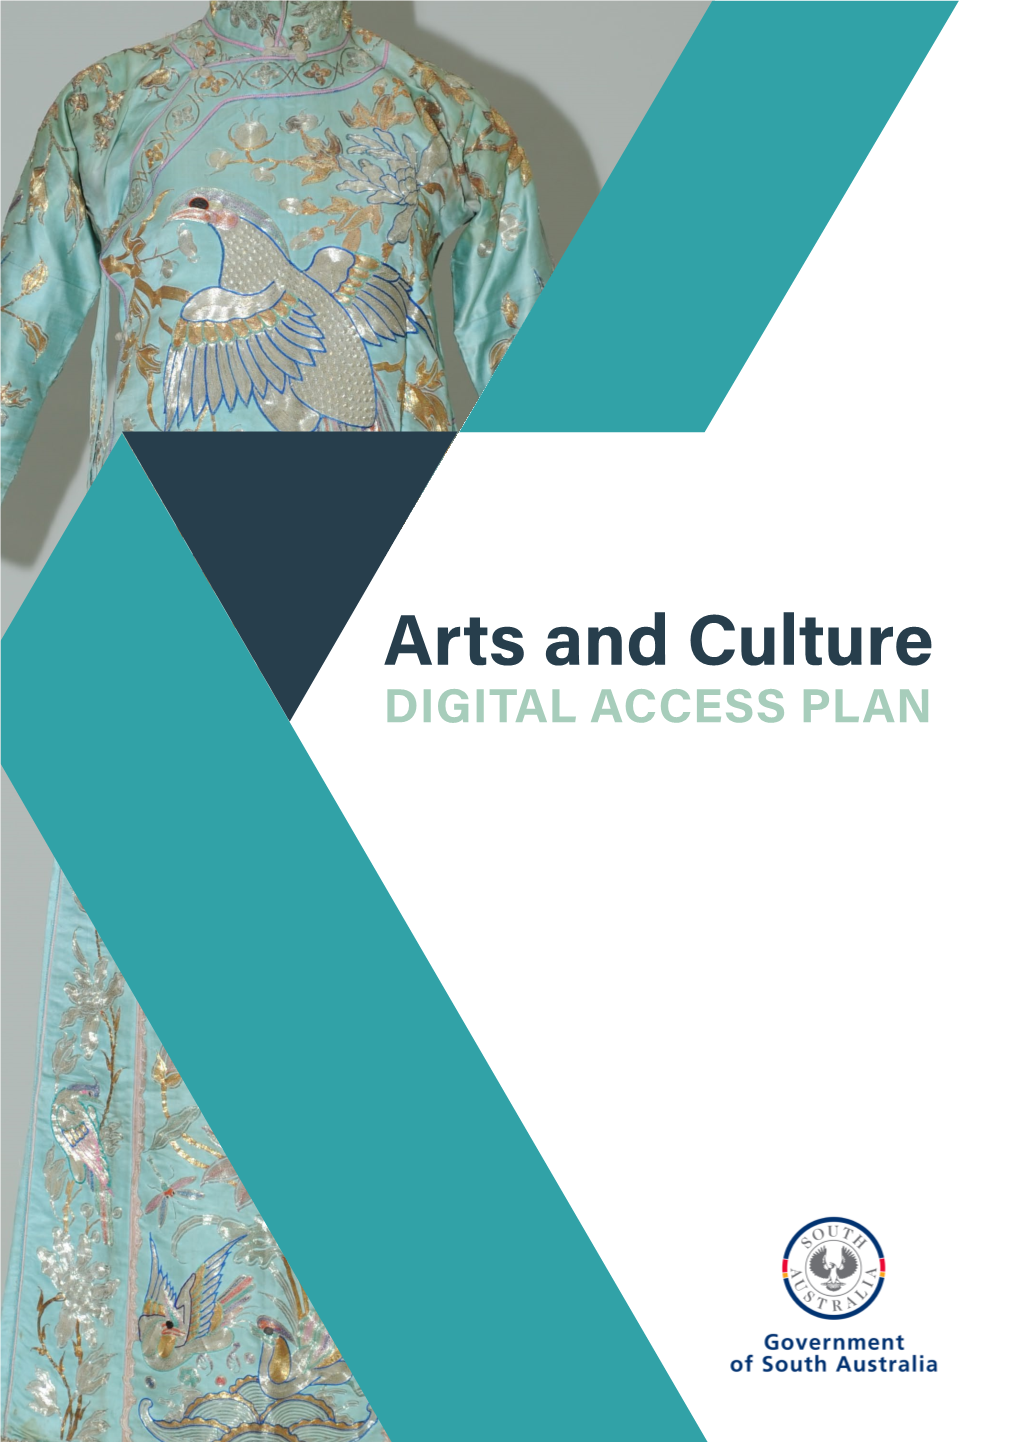 Arts and Culture DIGITAL ACCESS PLAN Background